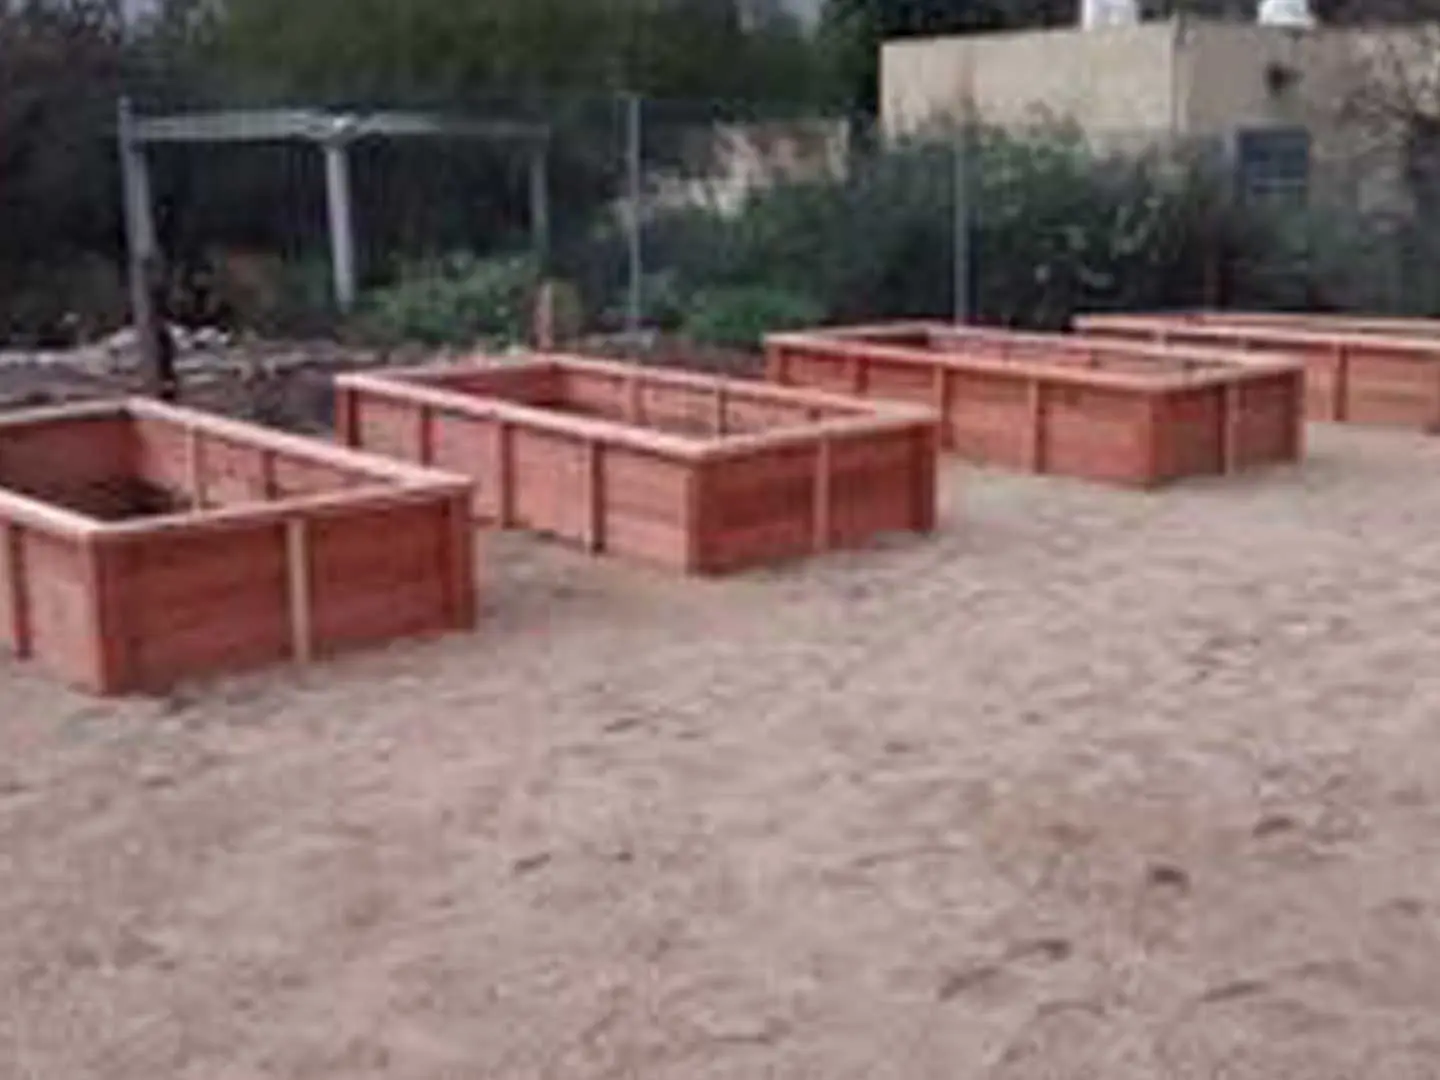 A group of wooden boxes in the sand.